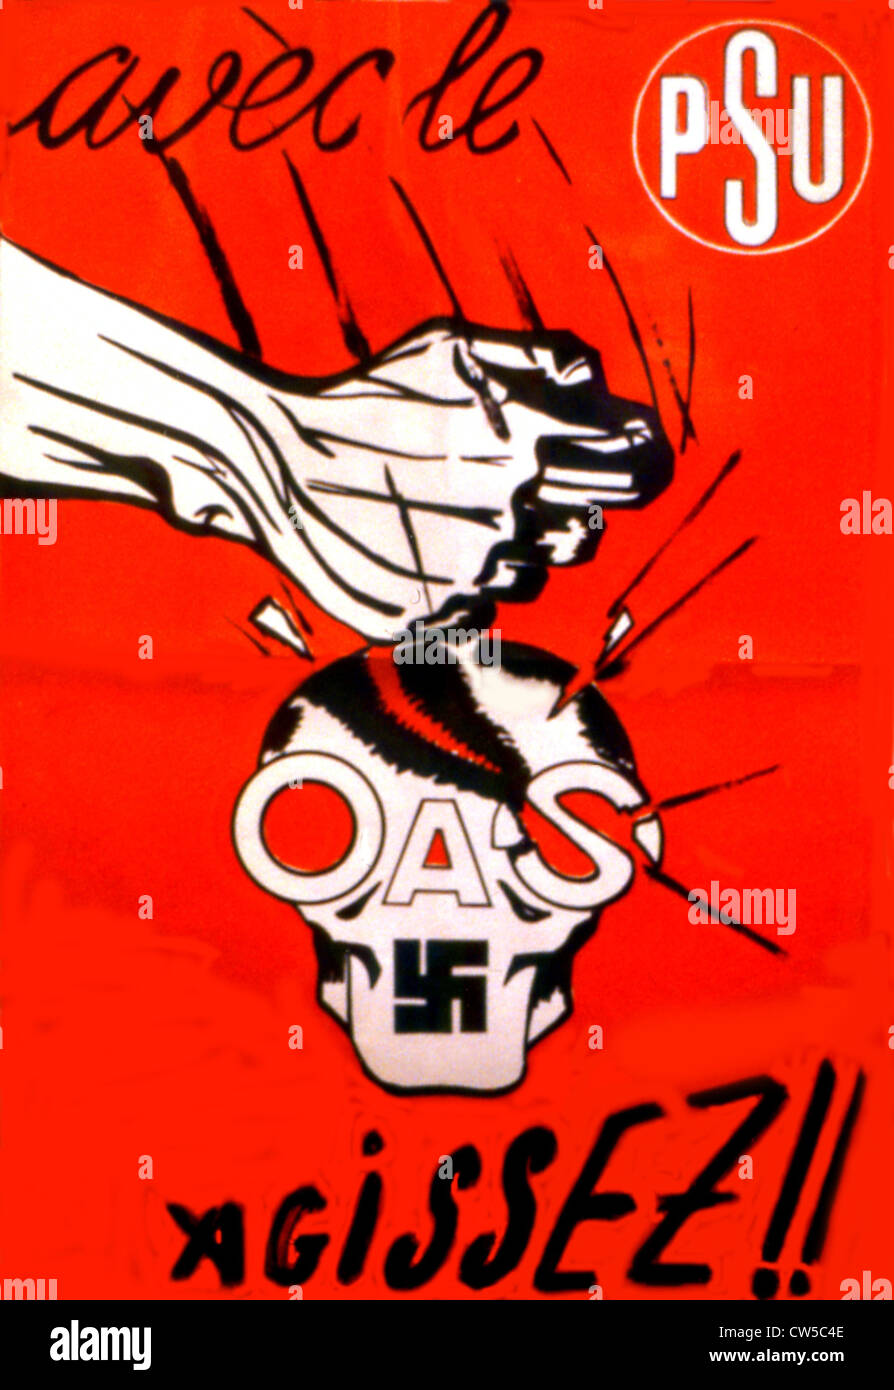 P.S.U. propaganda poster against the O.A.S. during the Algerian War Stock Photo